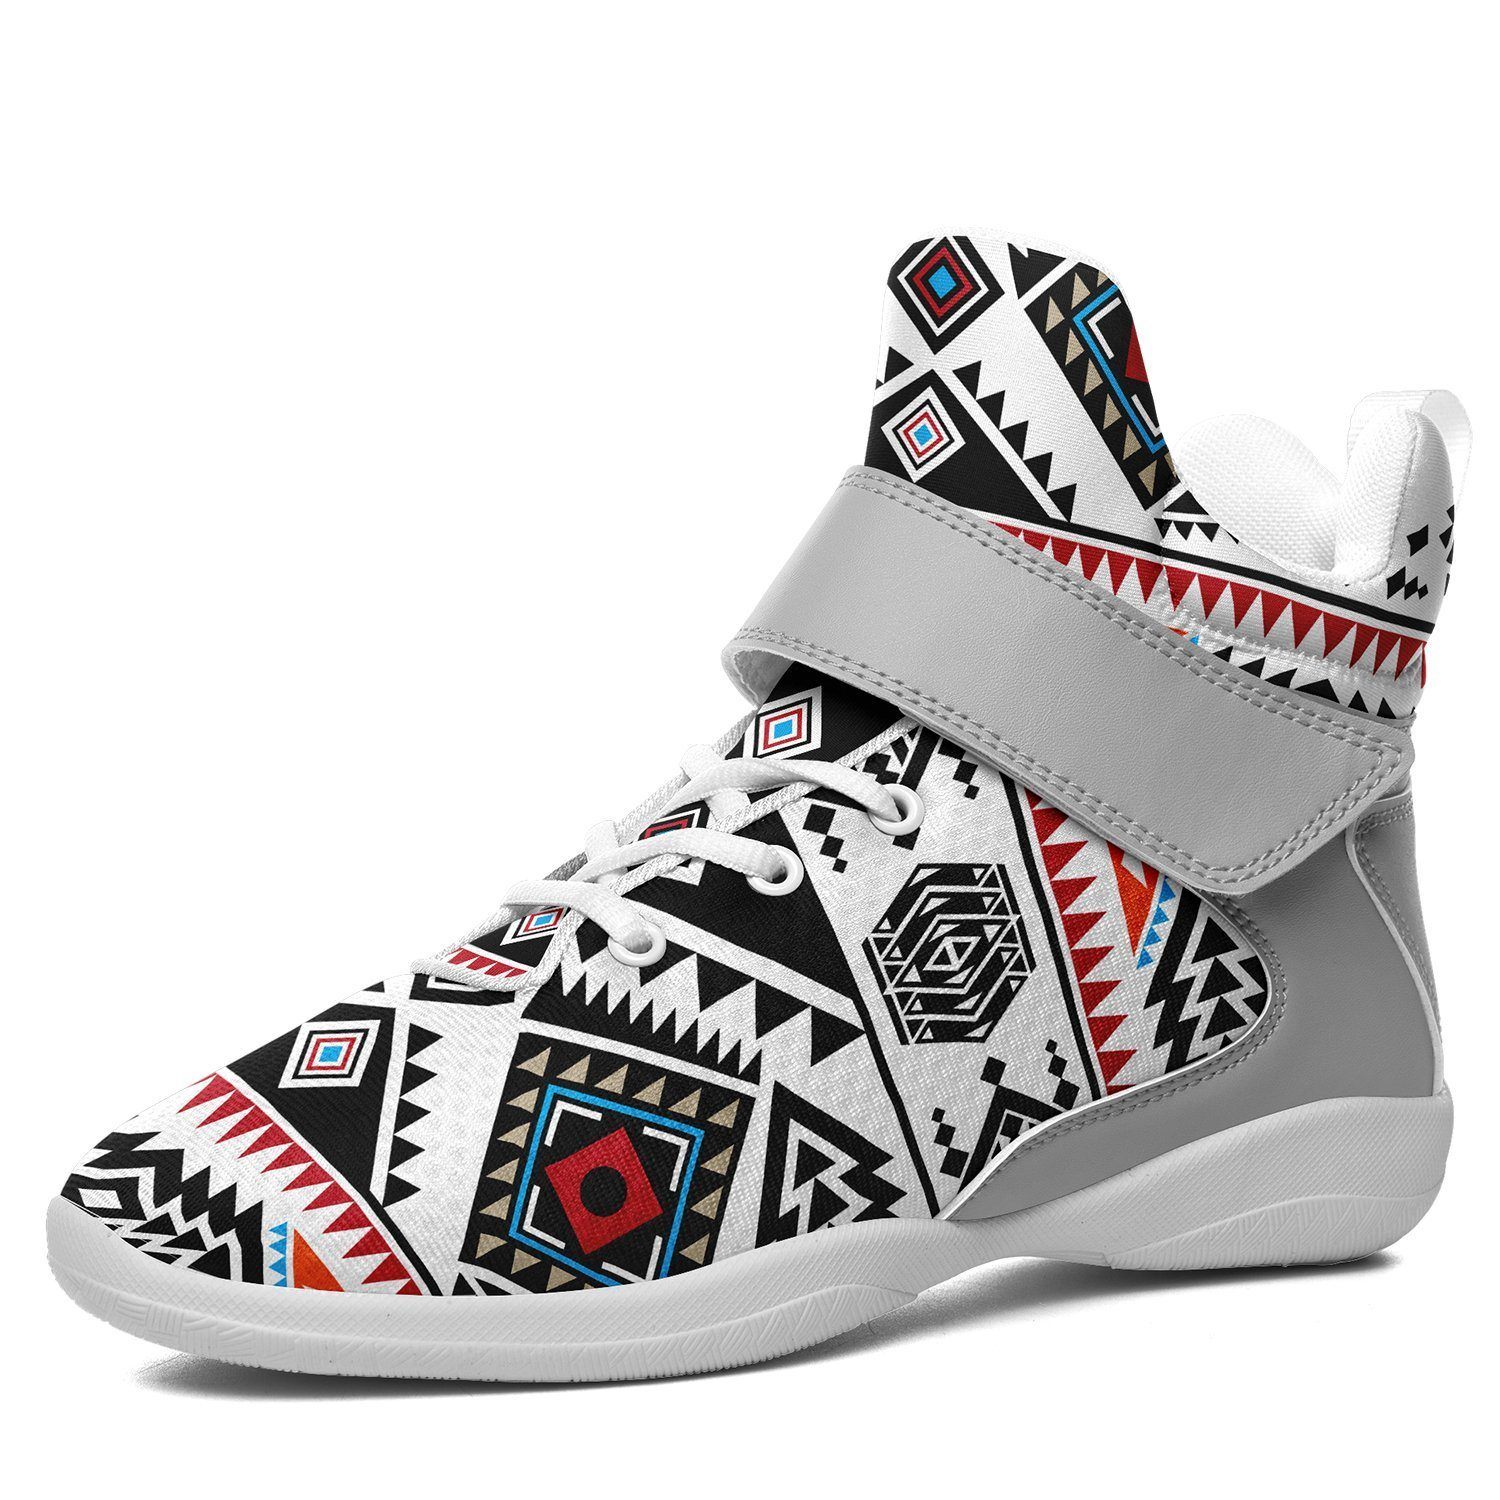 California Coast Ipottaa Basketball / Sport High Top Shoes - White Sole 49 Dzine US Men 7 / EUR 40 White Sole with Gray Strap 